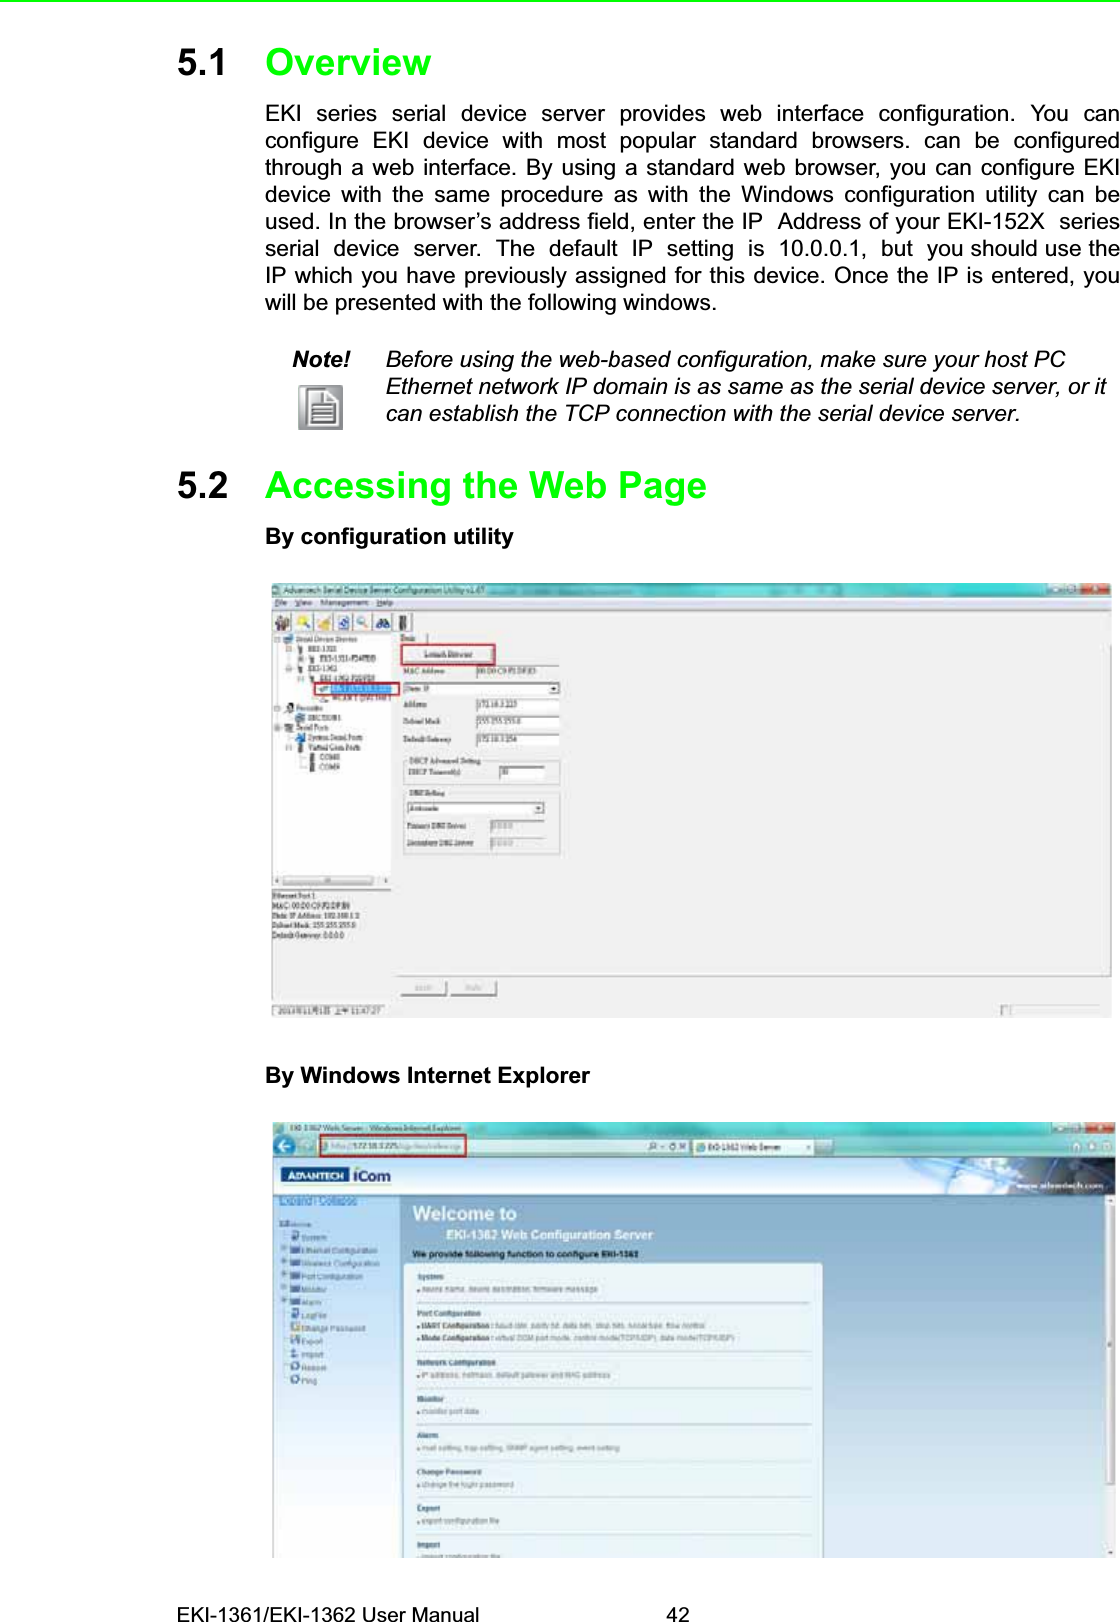 EKI-1361/EKI-1362 User Manual 425.1 OverviewEKI series serial device server provides web interface configuration. You canconfigure EKI device with most popular standard browsers. can be configuredthrough a web interface. By using a standard web browser, you can configure EKIdevice with the same procedure as with the Windows configuration utility can beused. In the browser’s address field, enter the IP  Address of your EKI-152X  seriesserial  device  server.  The  default  IP  setting  is  10.0.0.1,  but  you should use theIP which you have previously assigned for this device. Once the IP is entered, youwill be presented with the following windows.5.2 Accessing the Web PageBy configuration utilityBy Windows Internet ExplorerNote! Before using the web-based configuration, make sure your host PC Ethernet network IP domain is as same as the serial device server, or it can establish the TCP connection with the serial device server.